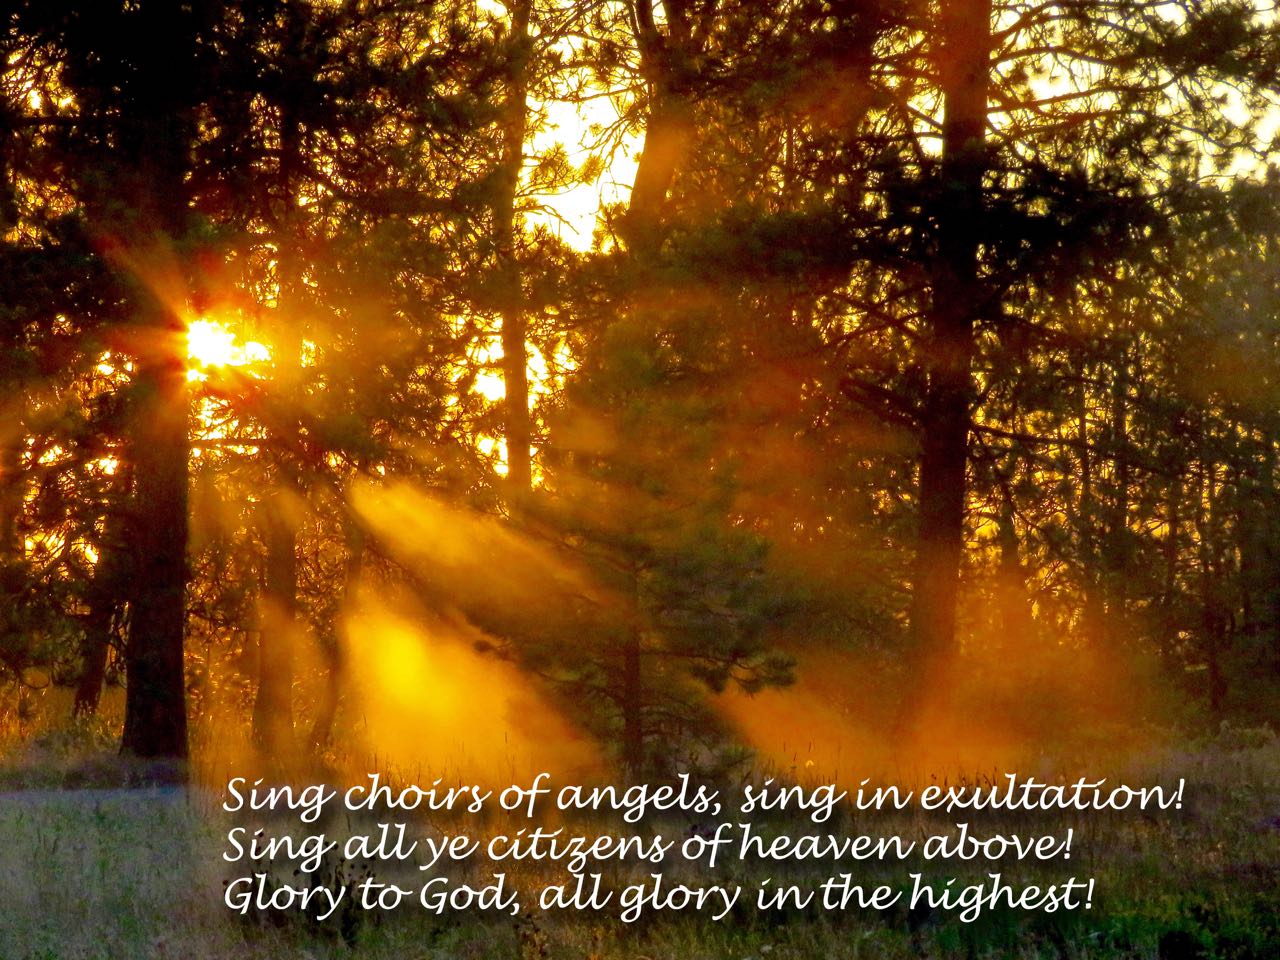 Sing choirs of angels